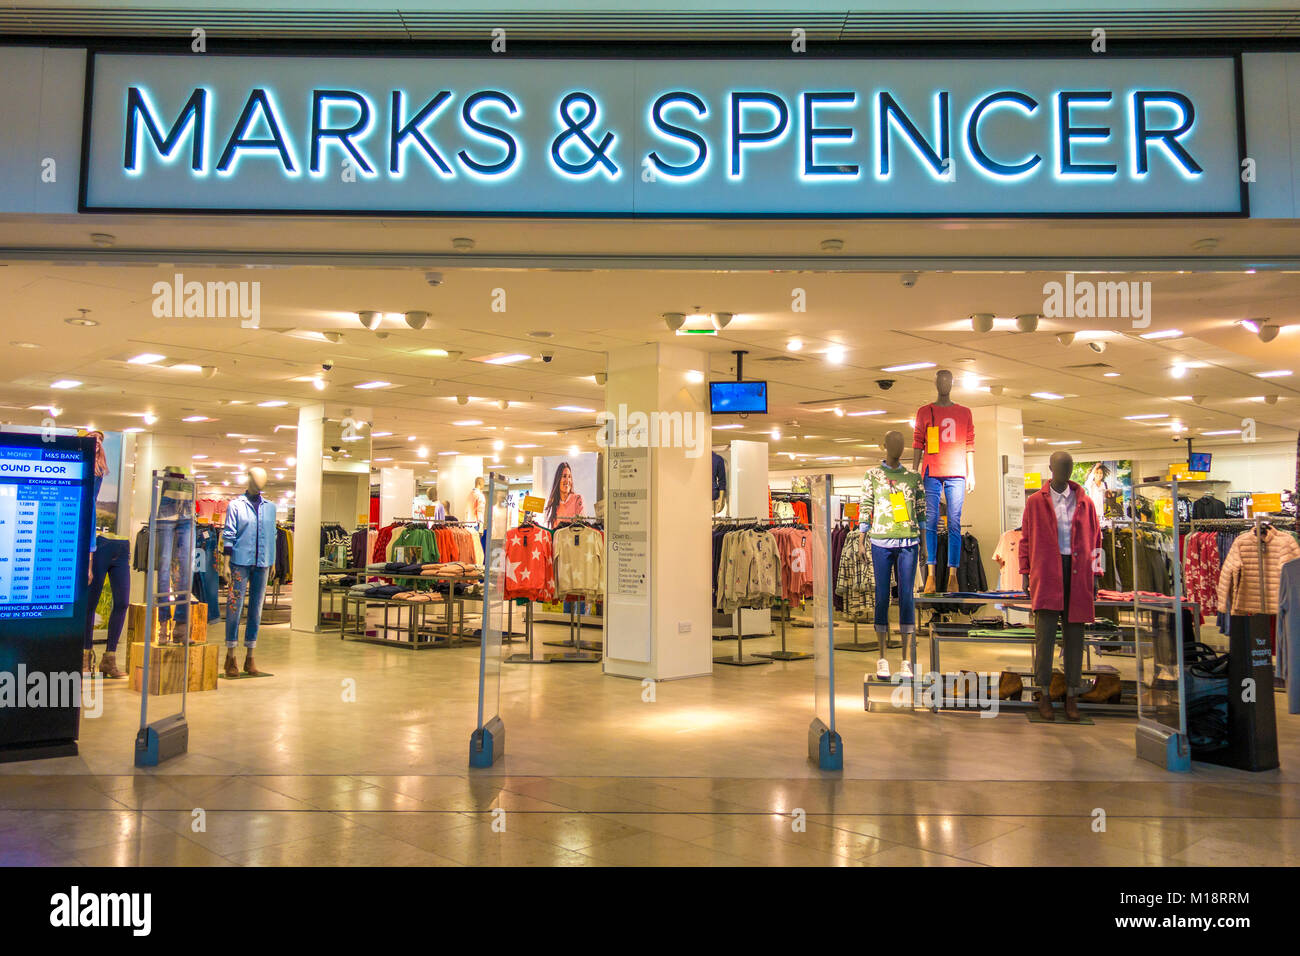 Uk Shop Store Design High Resolution Stock Photography and Images - Alamy